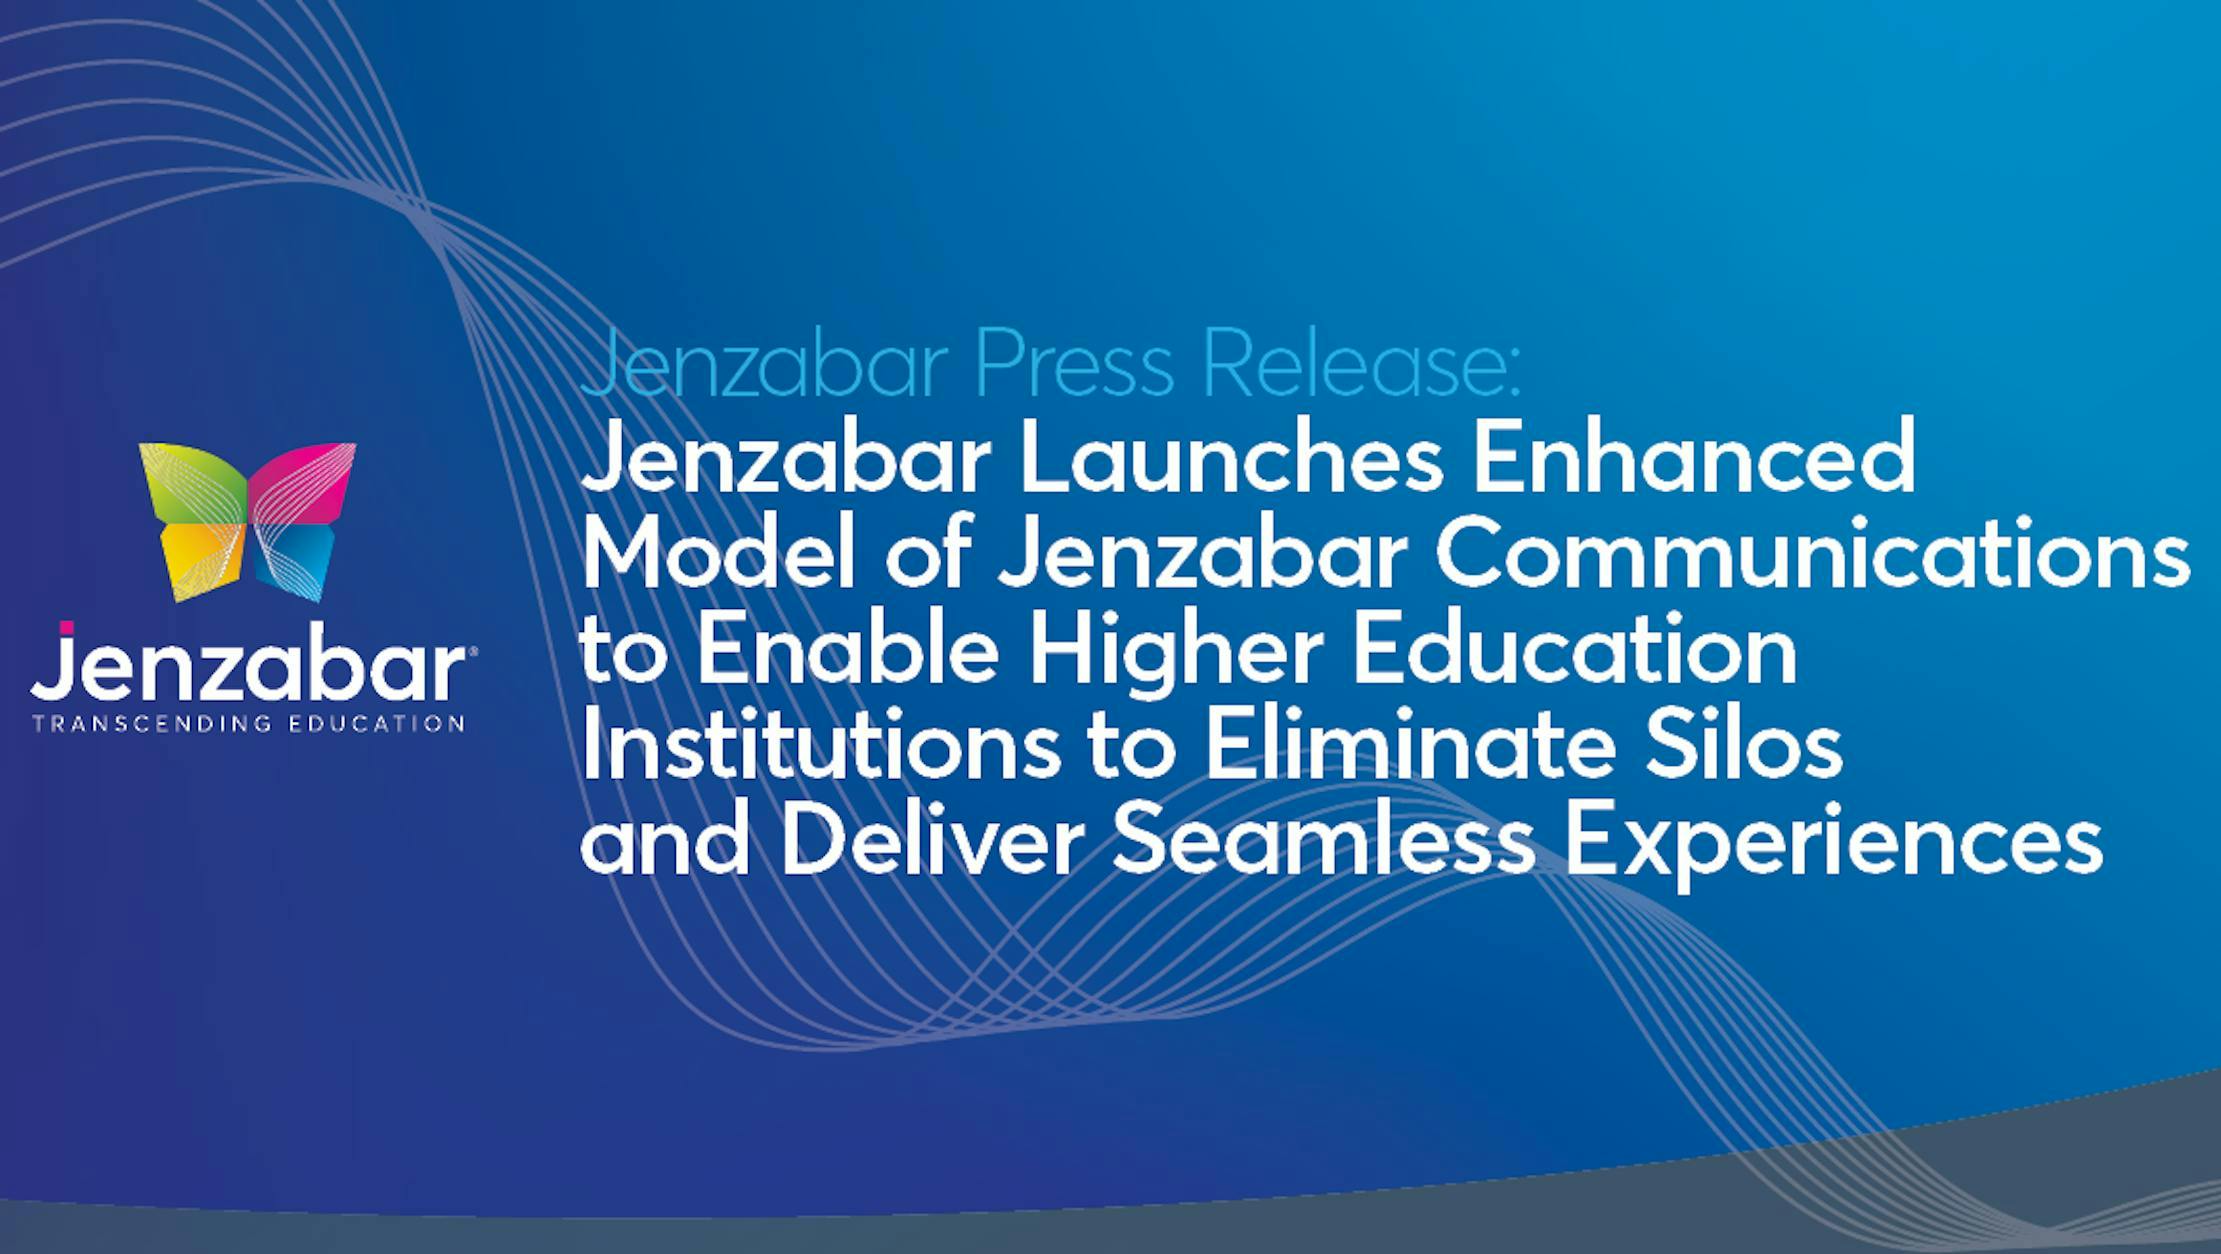 Press Release: Jenzabar Launches Enhanced Model of Jenzabar Communications to Enable Higher Education Institutions to Eliminate Silos and Deliver Seamless Experiences